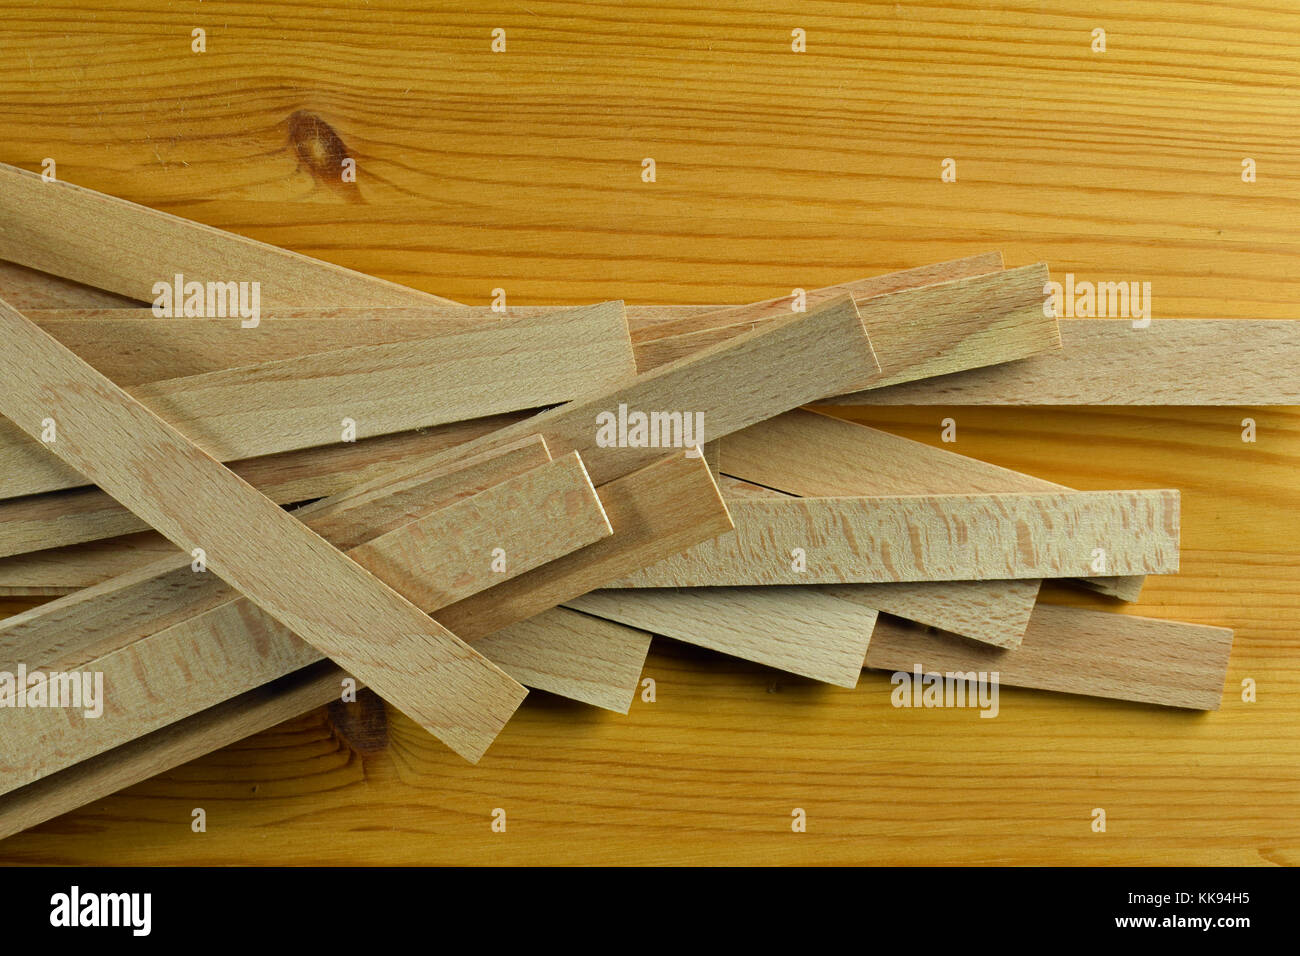 Wooden popsicle sticks Cut Out Stock Images & Pictures - Page 2 - Alamy